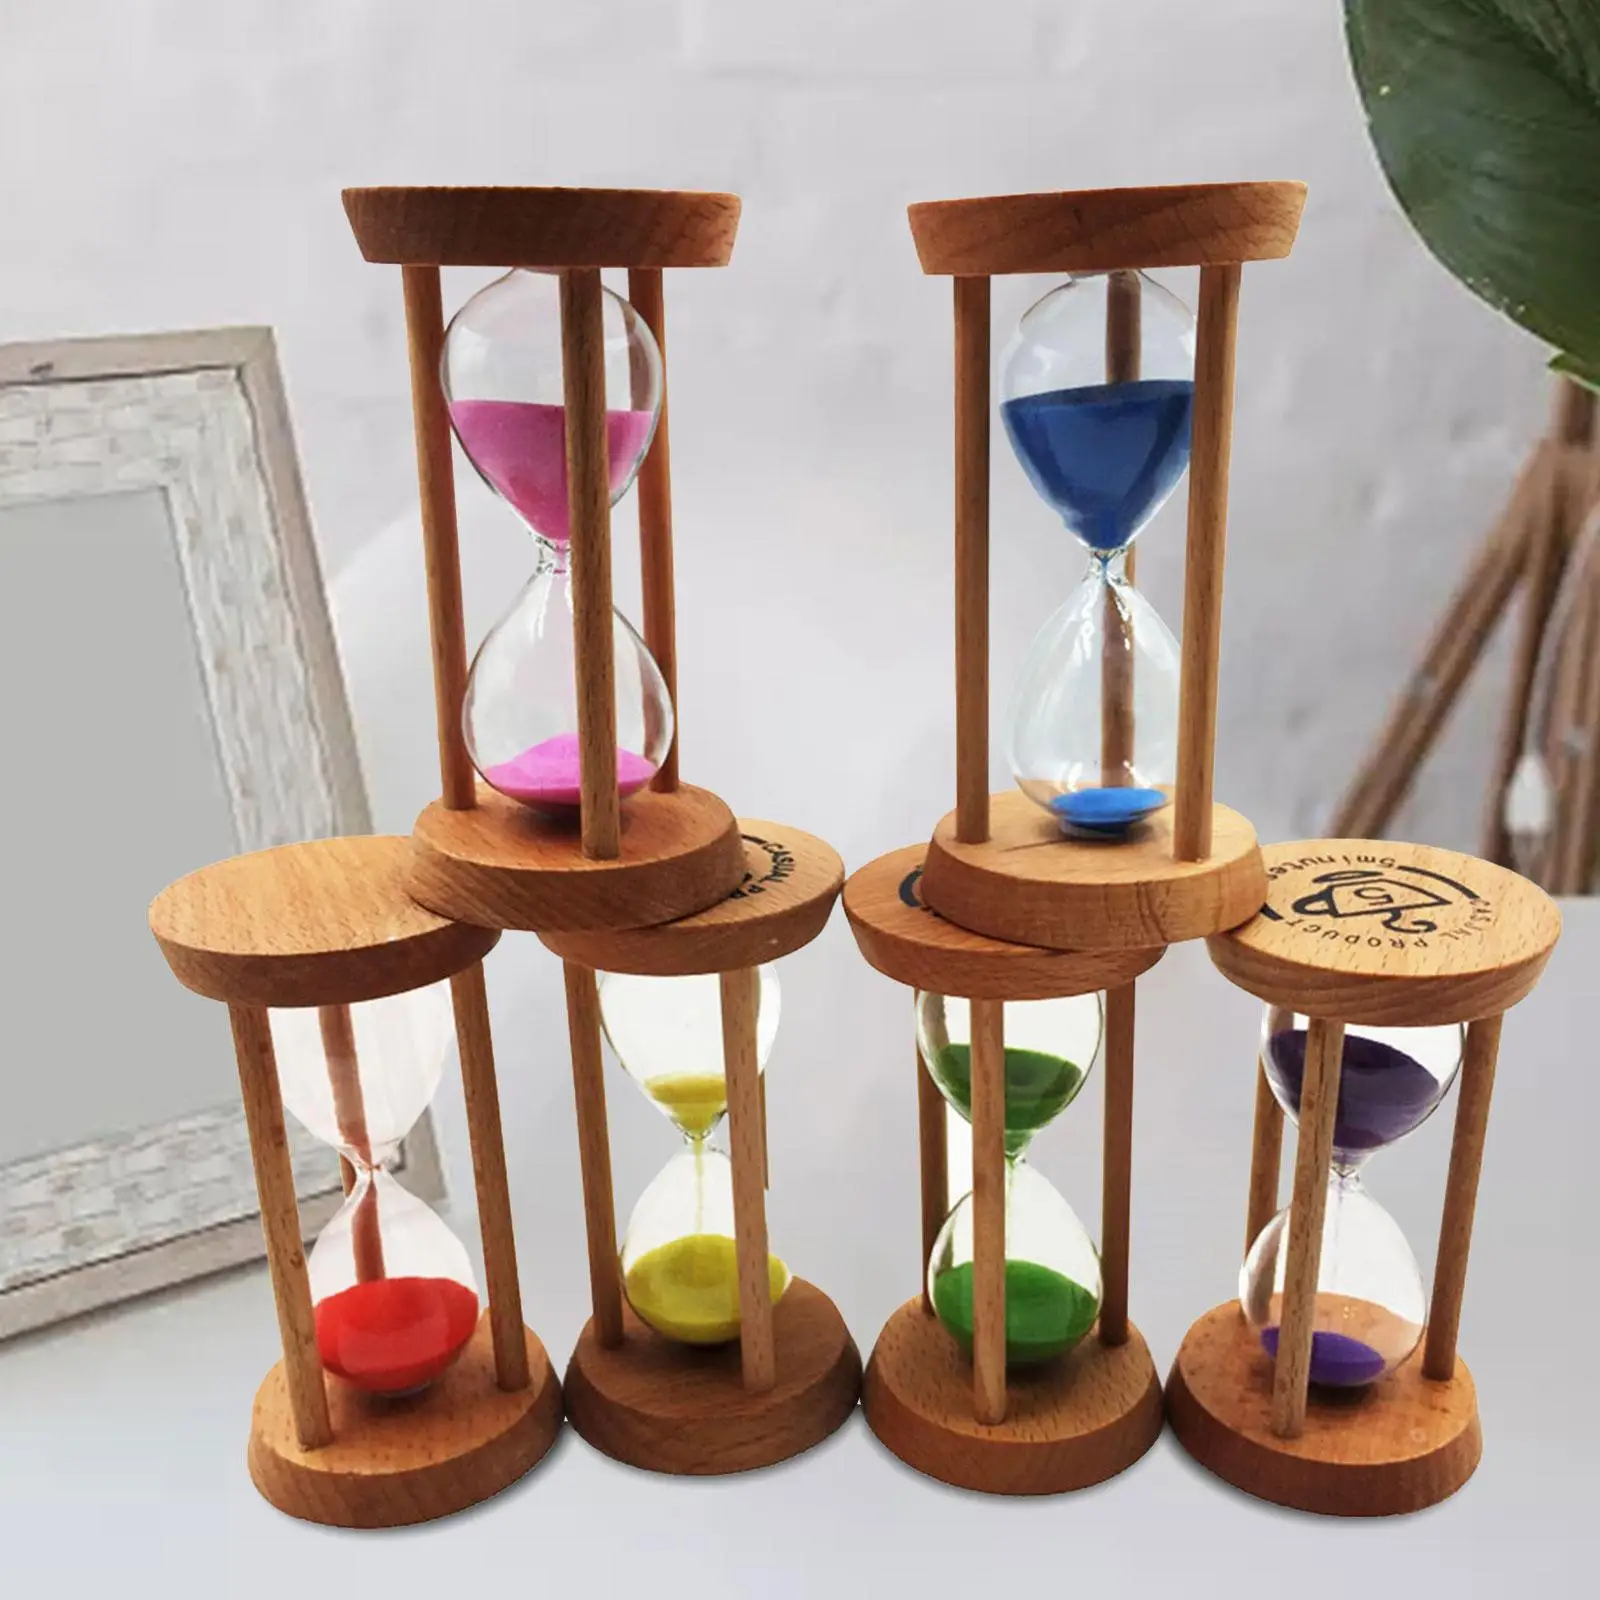 6Pcs Sand Timer Wood Hourglass Timer Sandglass Timer for Games Studying